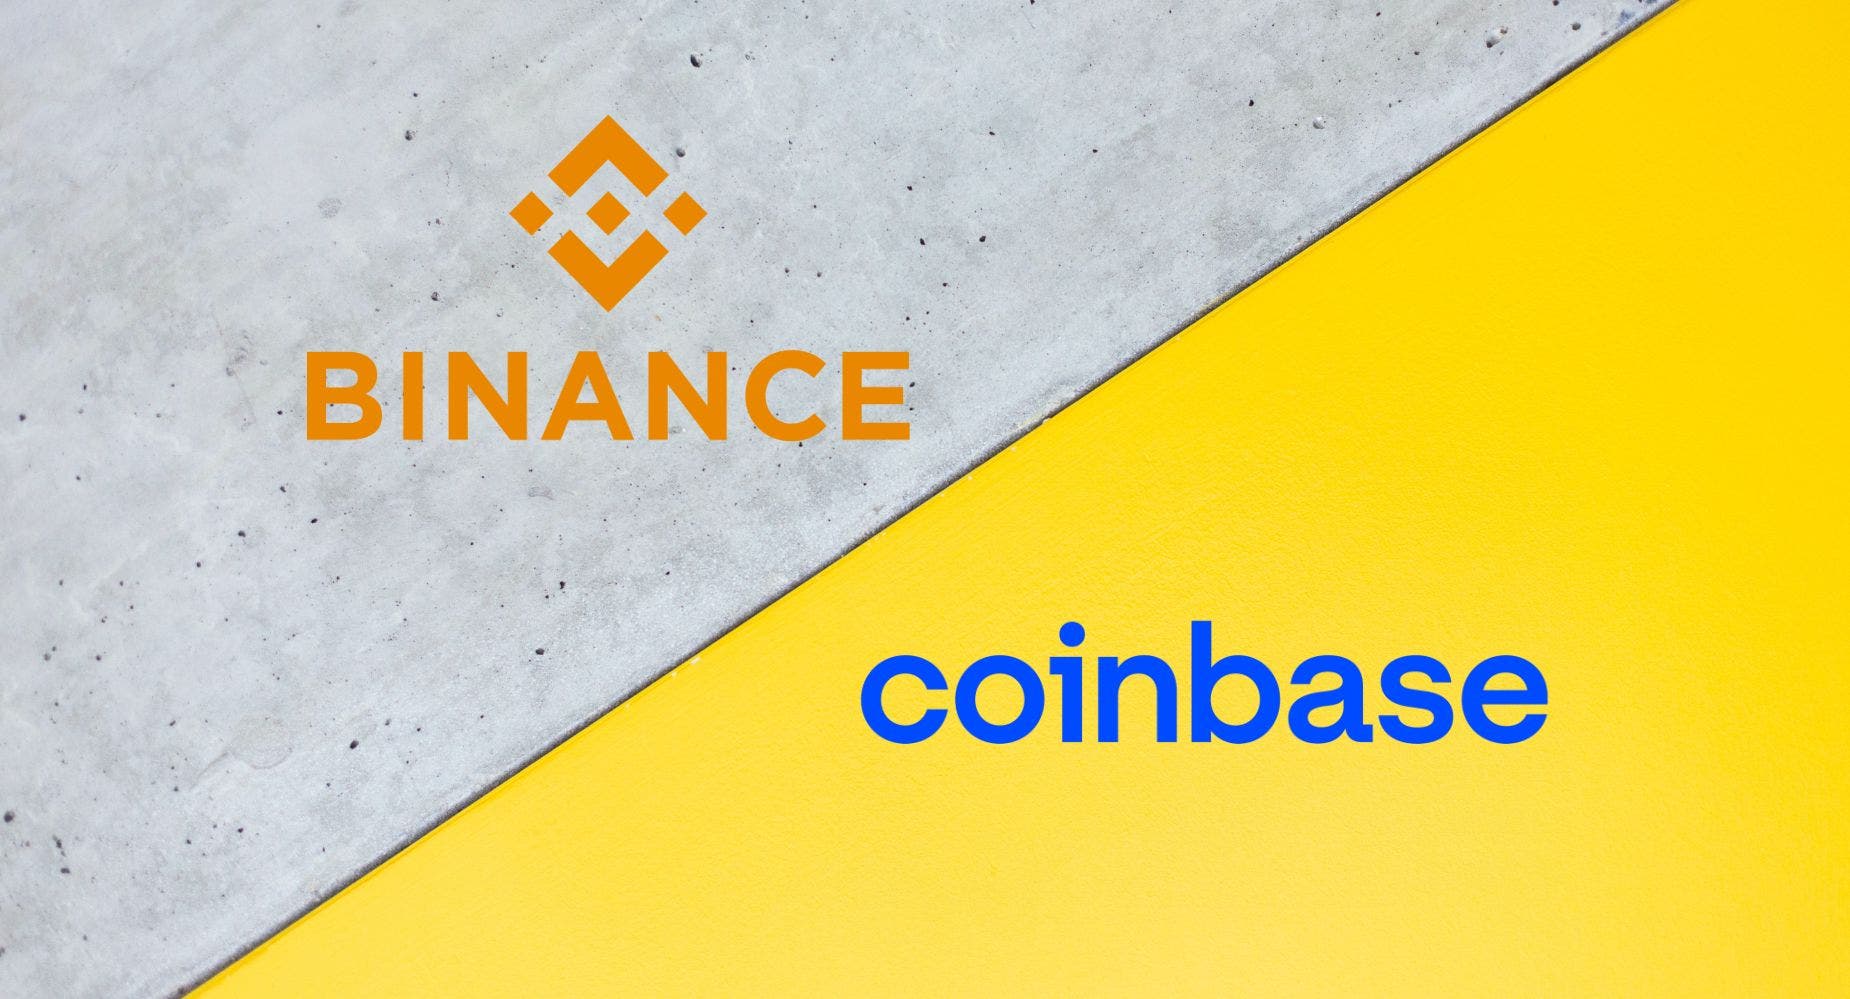 Binance Overtakes Coinbase In Bitcoin Balances; Investors Withdraw BTC From Coinbase Amidst Liquidity Fears